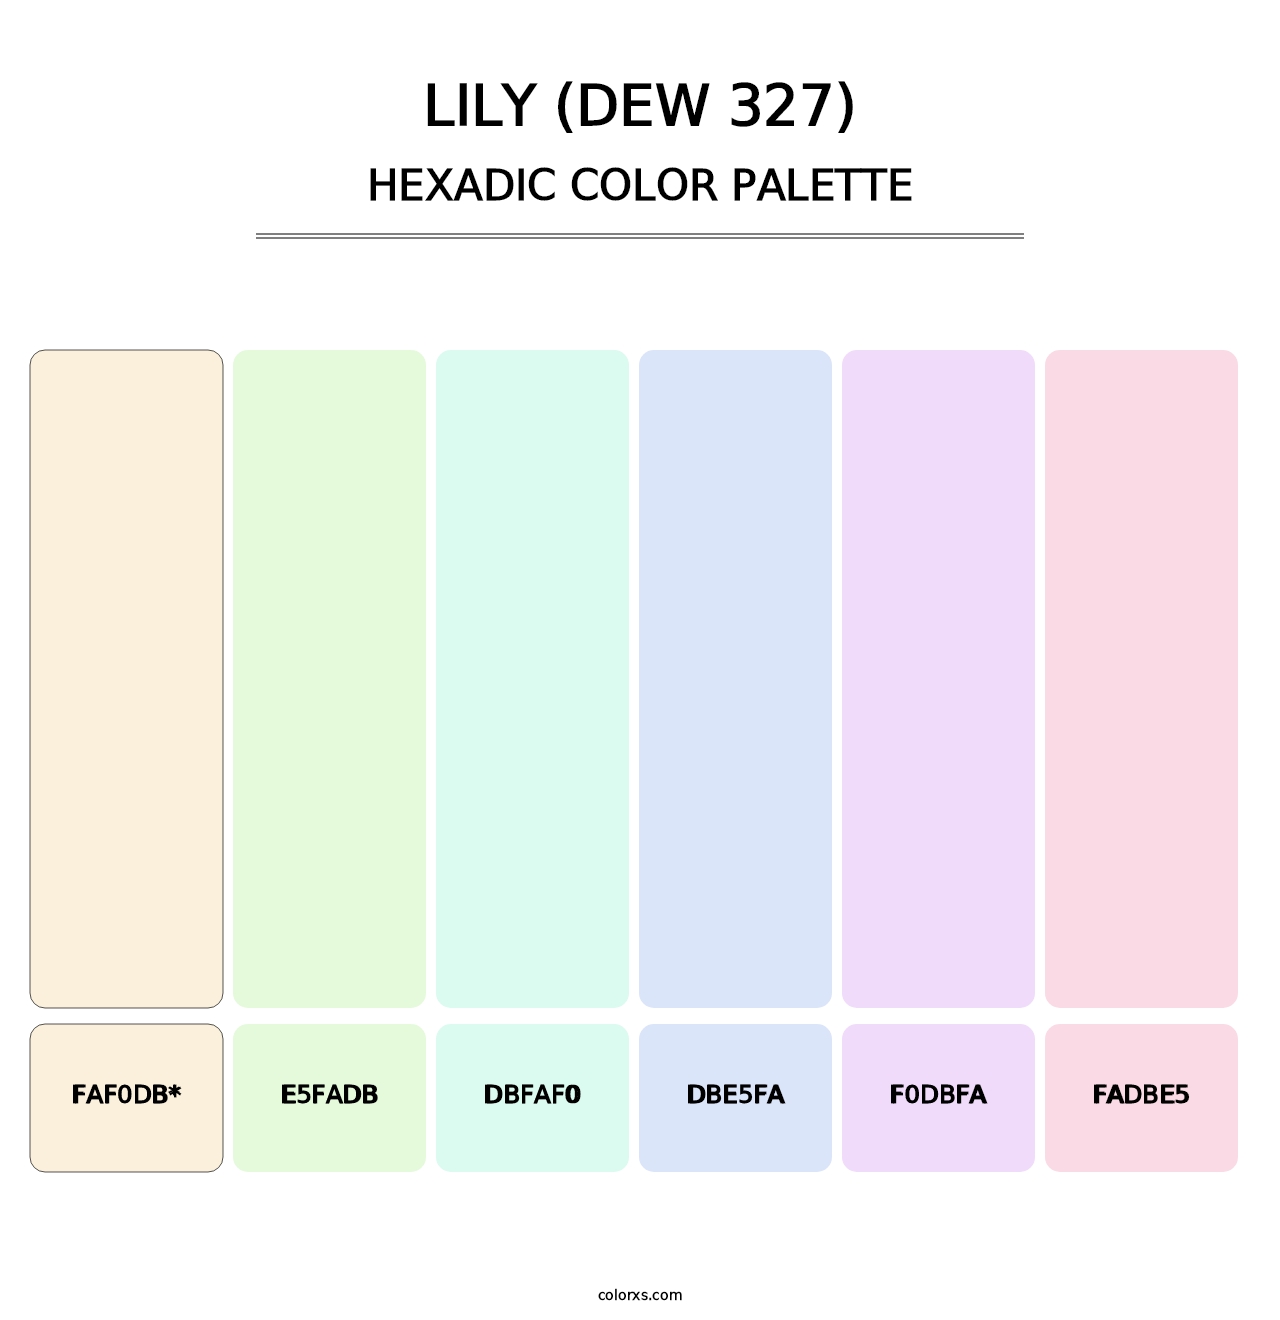 Lily (DEW 327) - Hexadic Color Palette